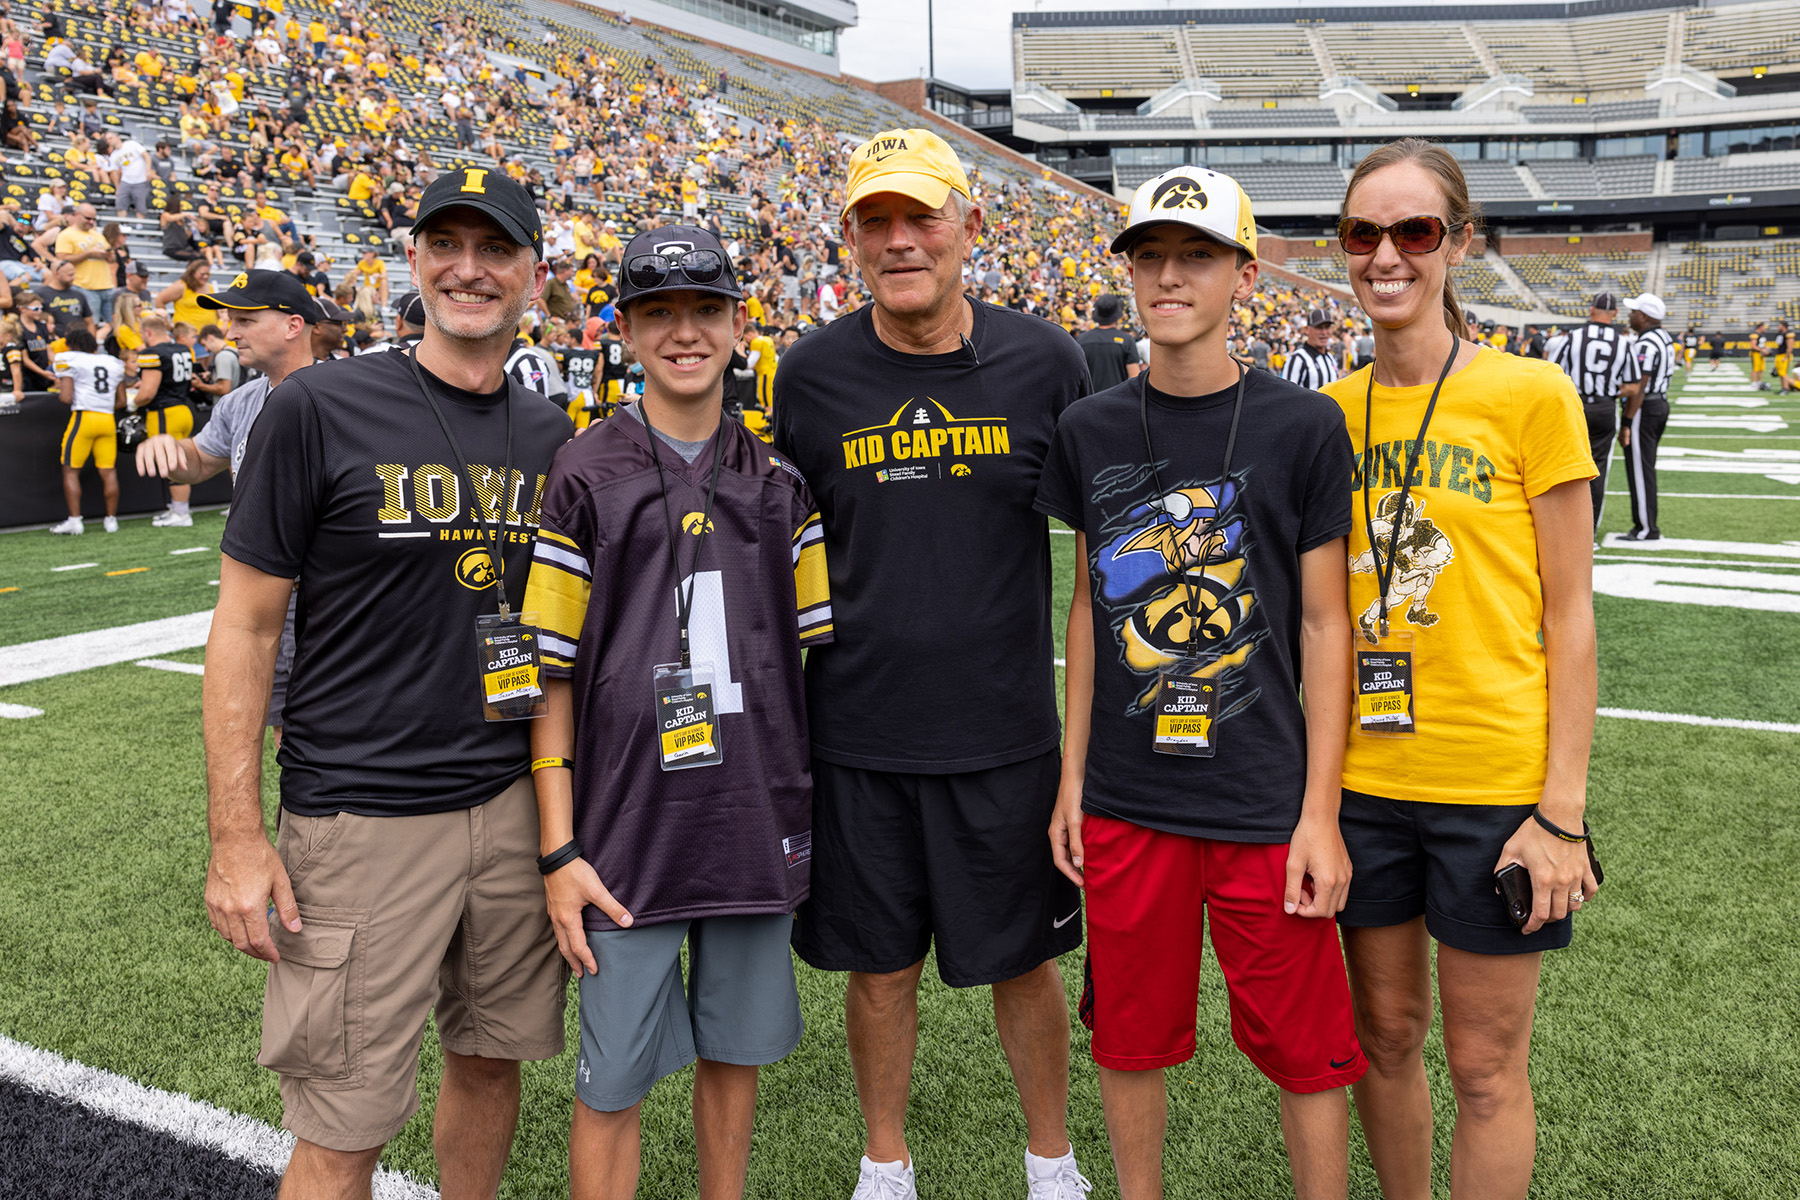 Kid Captain Gavin Miller on the field at Kinnick Stadium with family members and Coach Kirk Ferentz